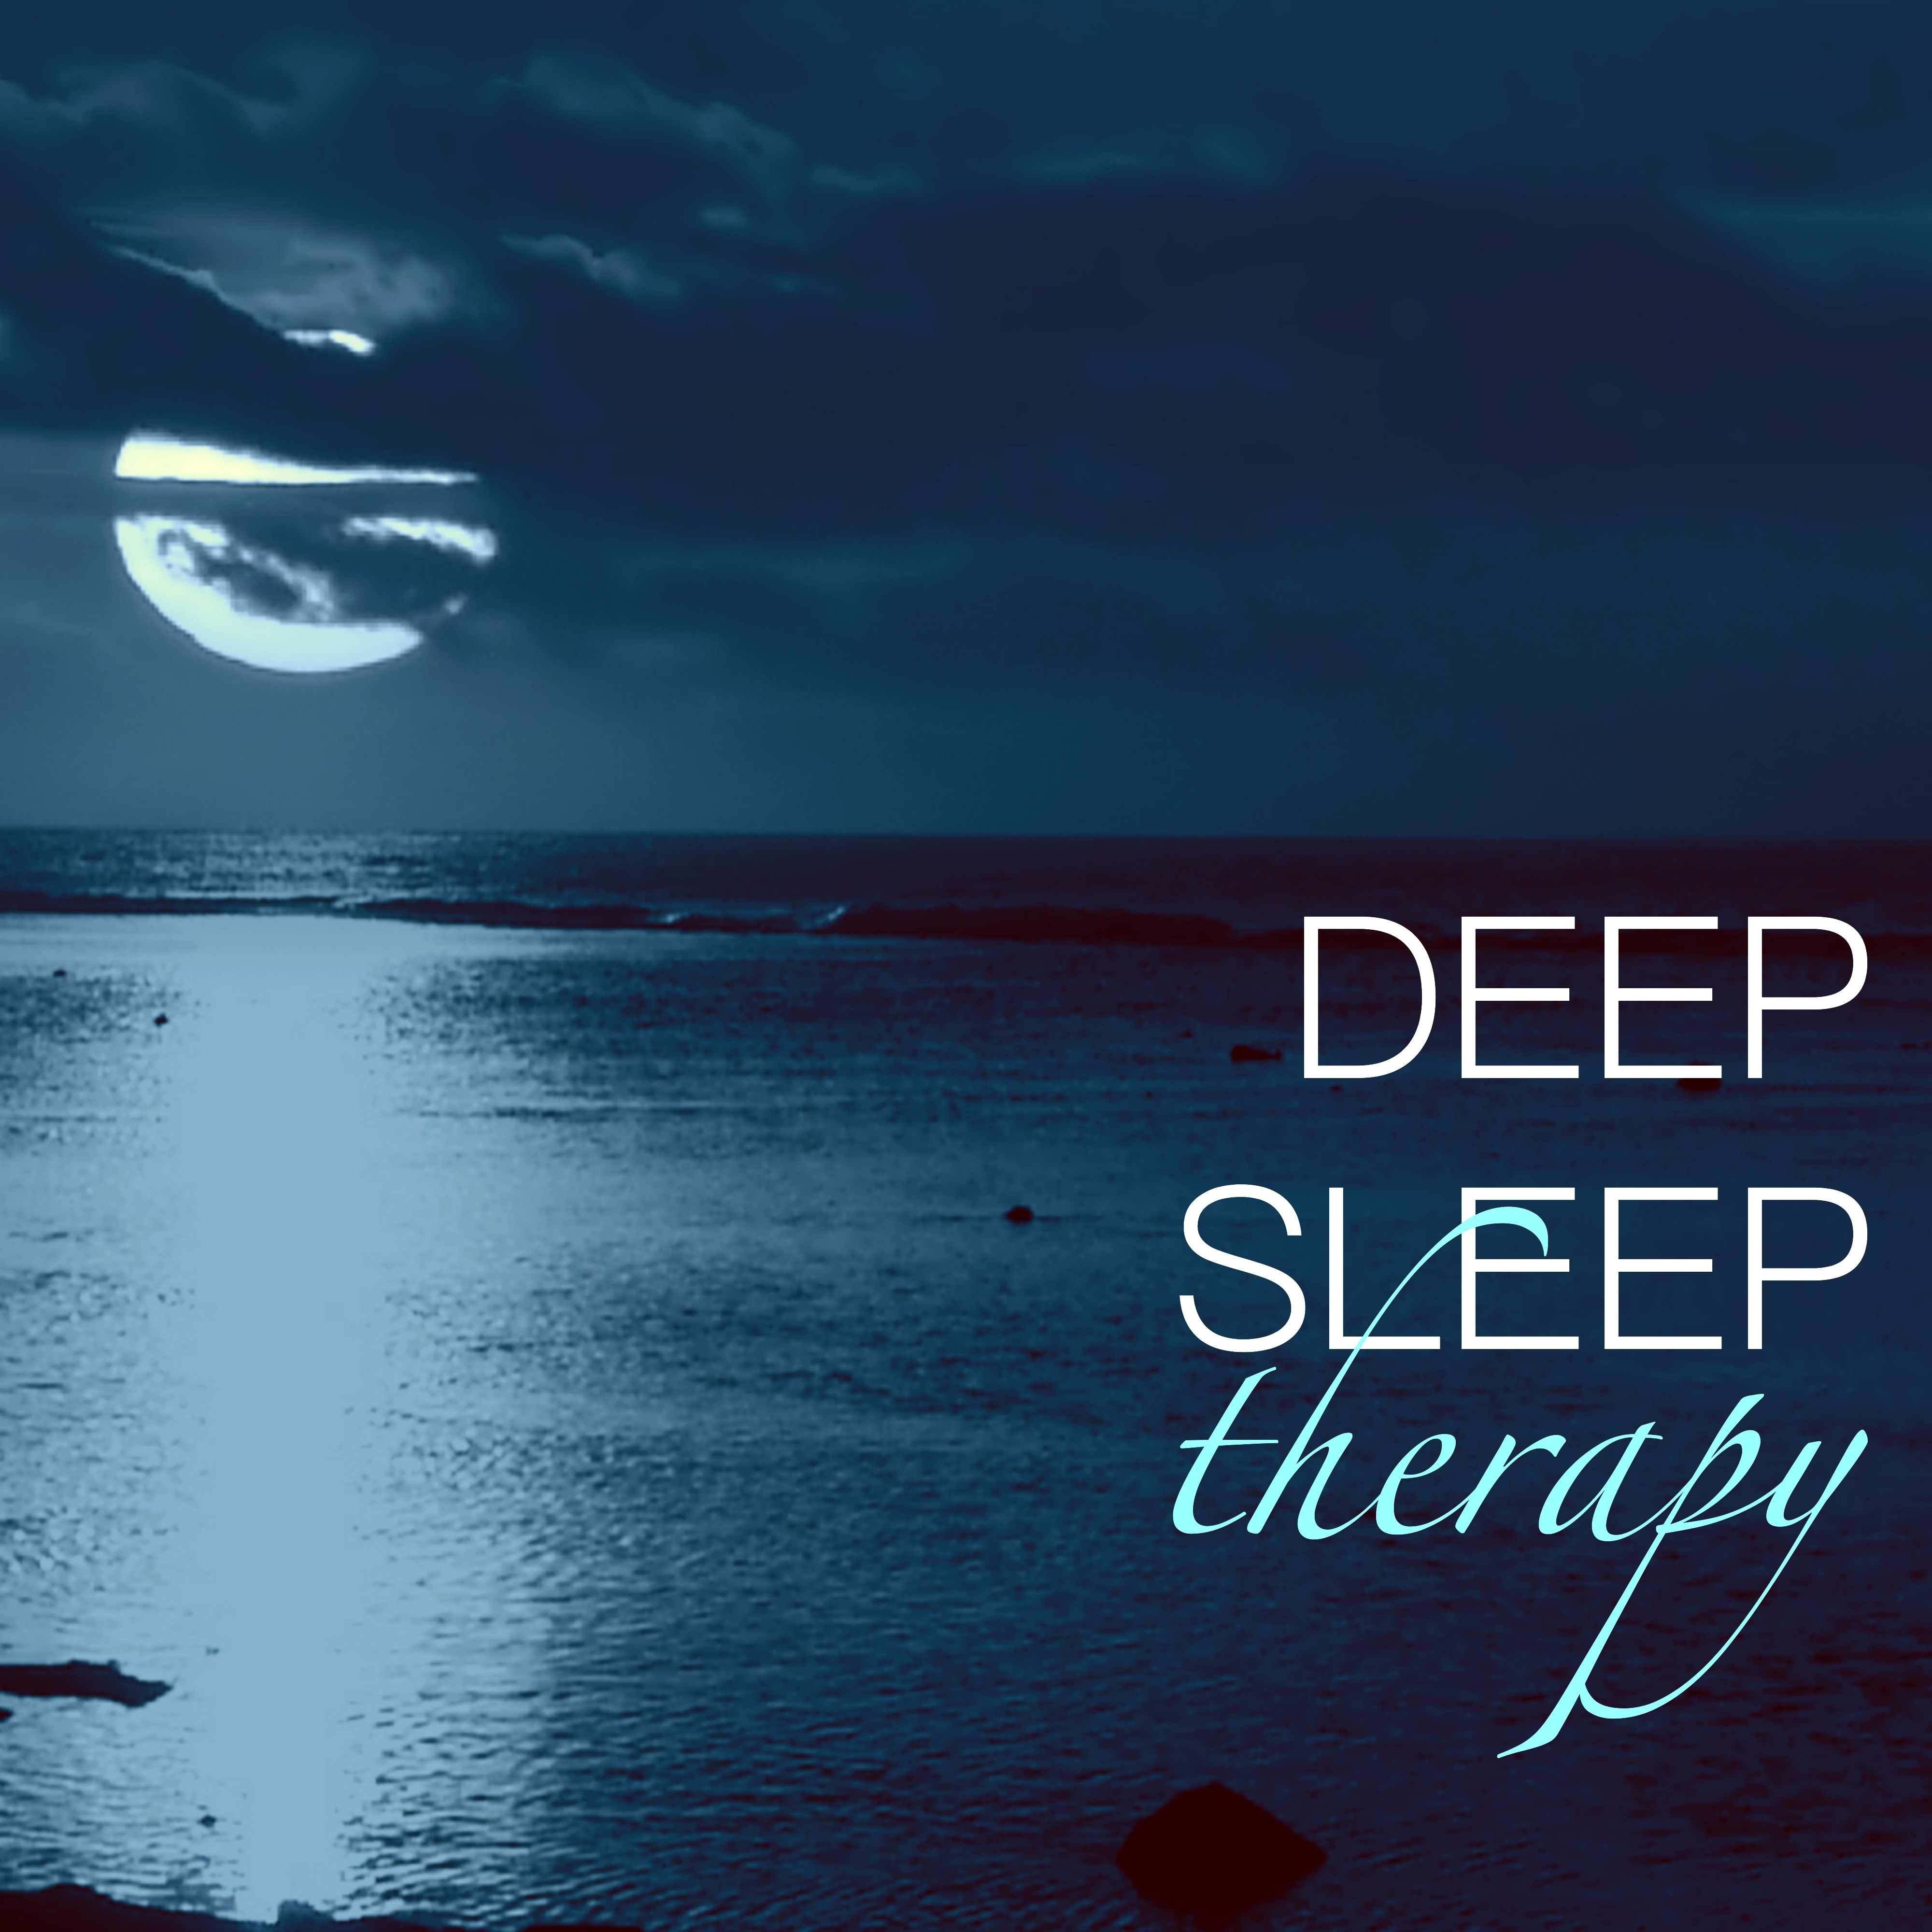 Deep Sleep Therapy - Sound Therapy as Natural Remedy to Sleep Deeply, Placebo Effect Music with Meditation Songs to Fall Asleep Faster and Sleep All Night Long